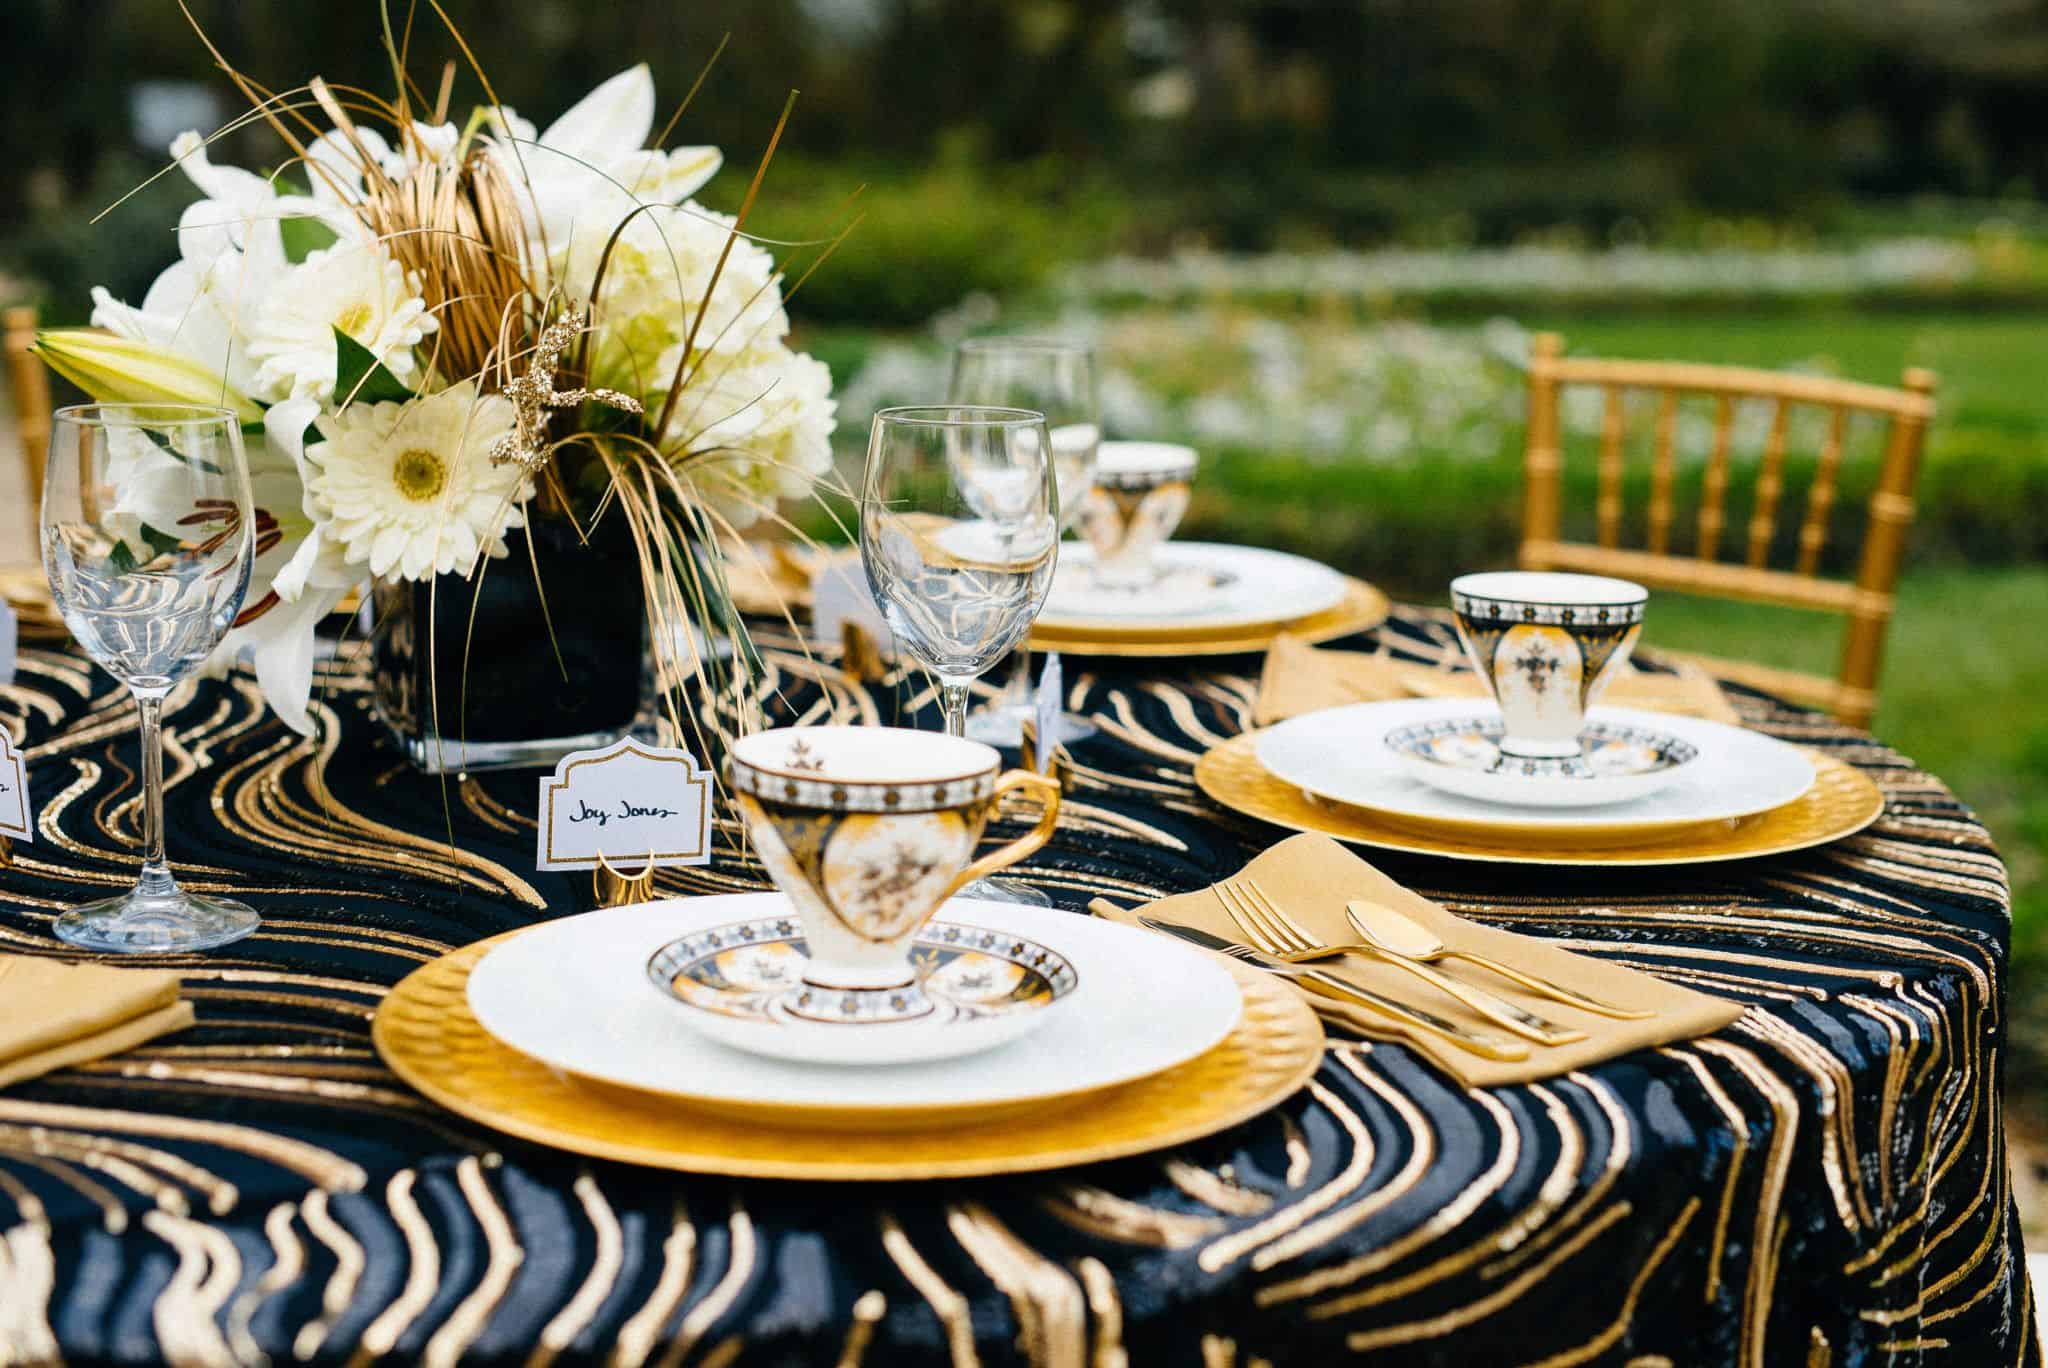 A table set with plates and cups on top of zebra print.